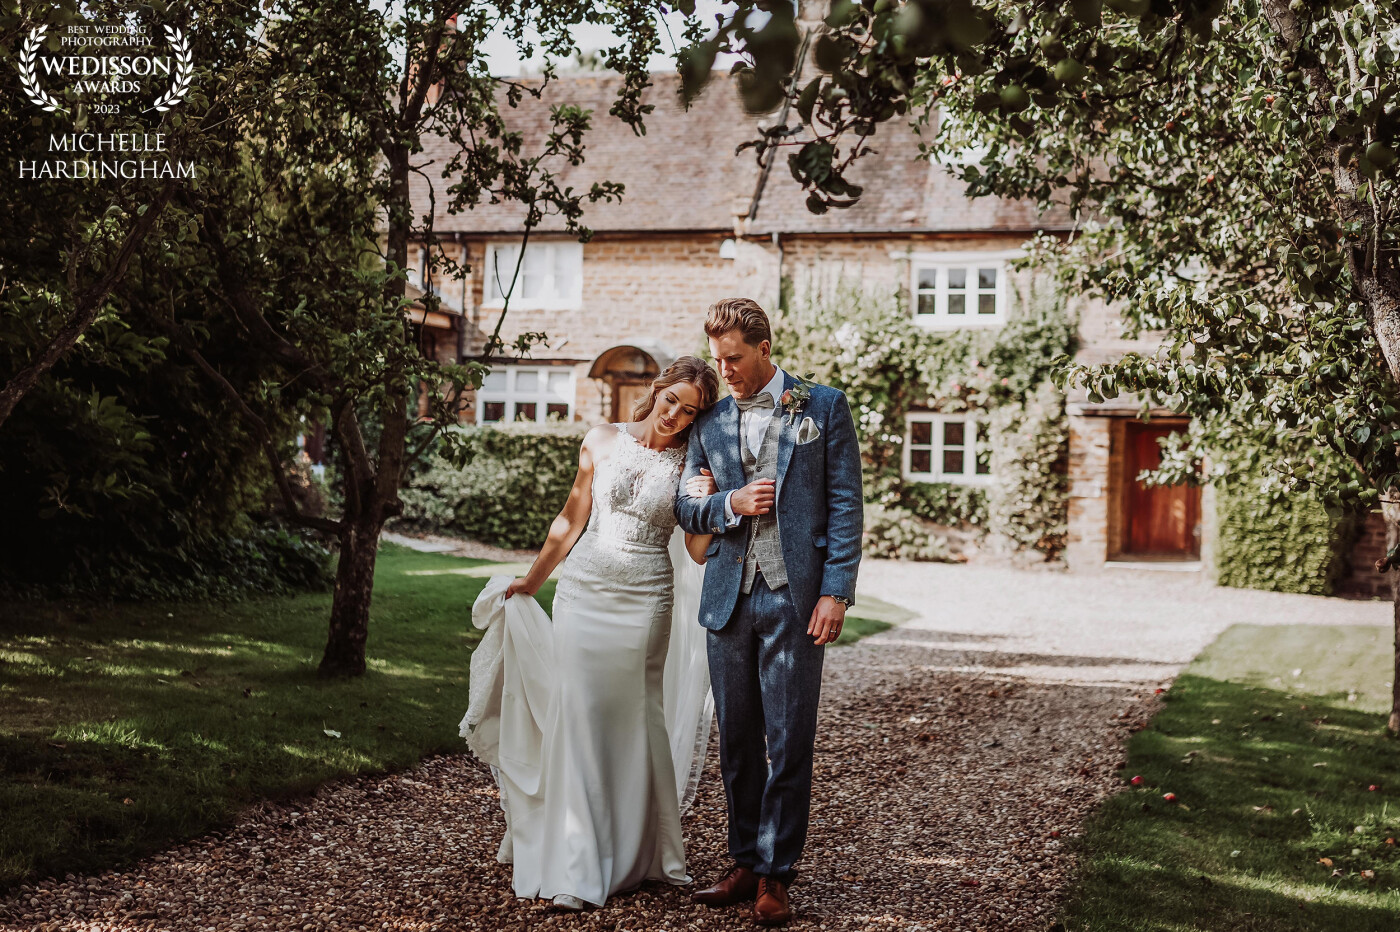 The cute cottage and beautiful trees leading down the path at Dodmoor House are the perfect backdrop for some shots on your wedding day. Rachael and Tom having a moment.